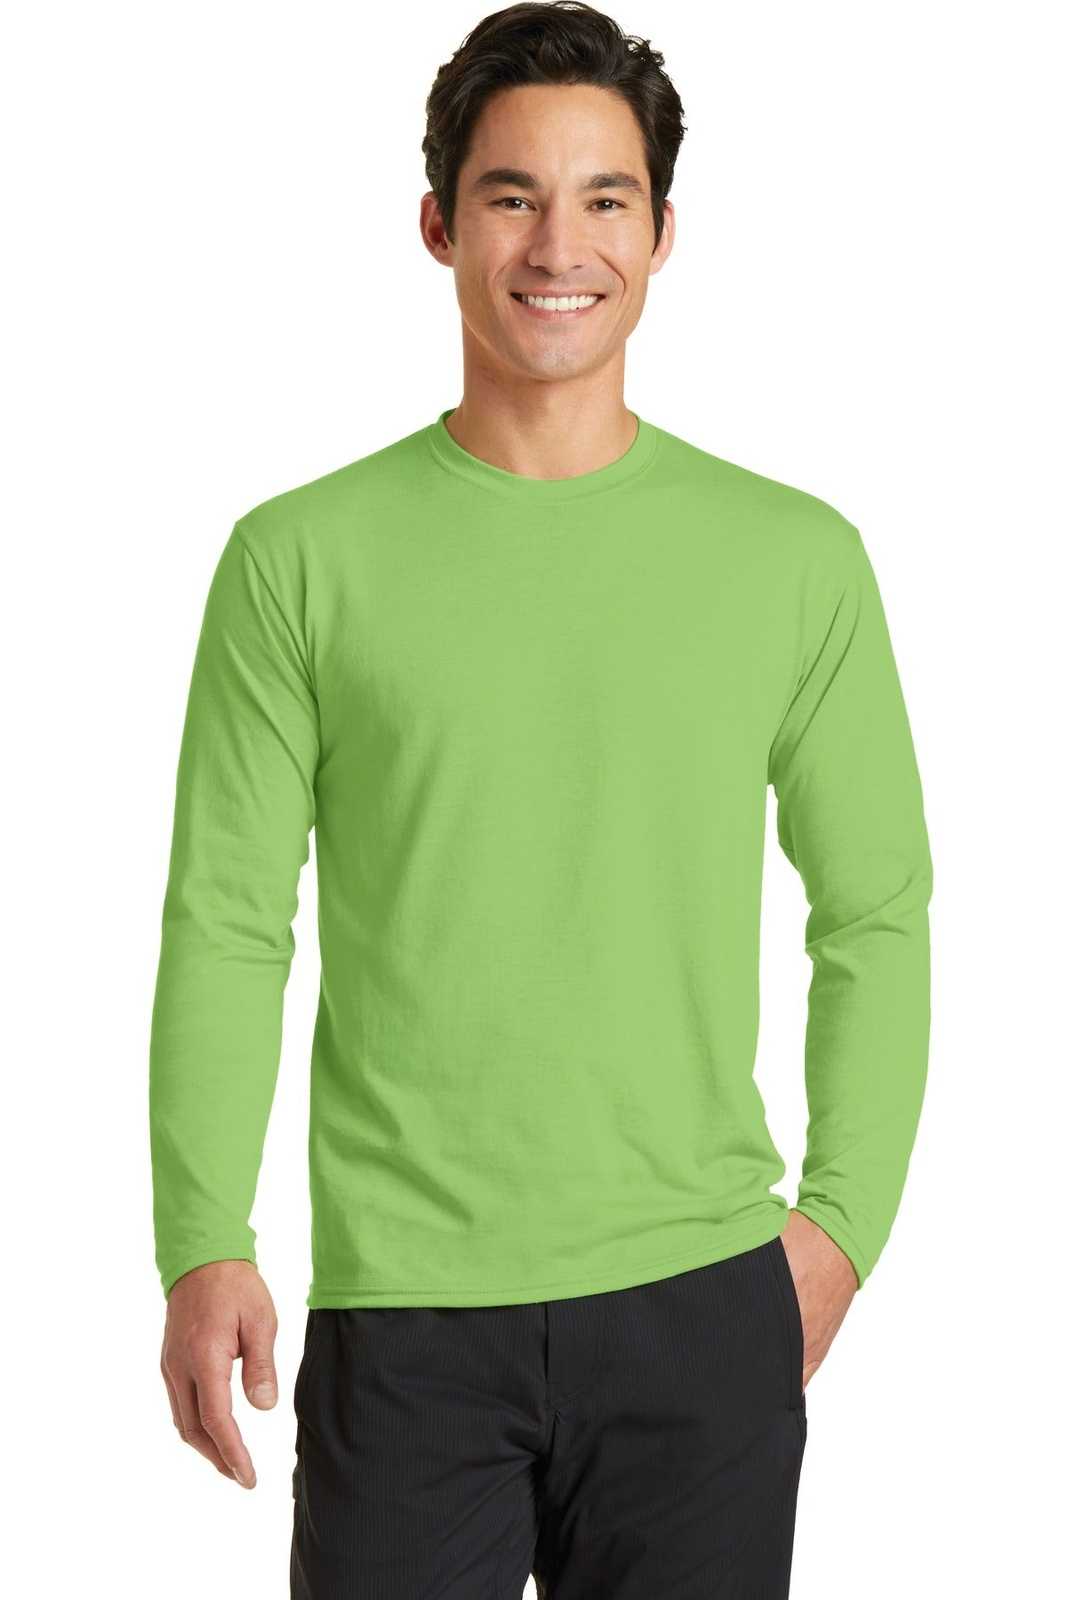 Port & Company PC381LS Long Sleeve Performance Blend Tee - Lime - HIT a Double - 1